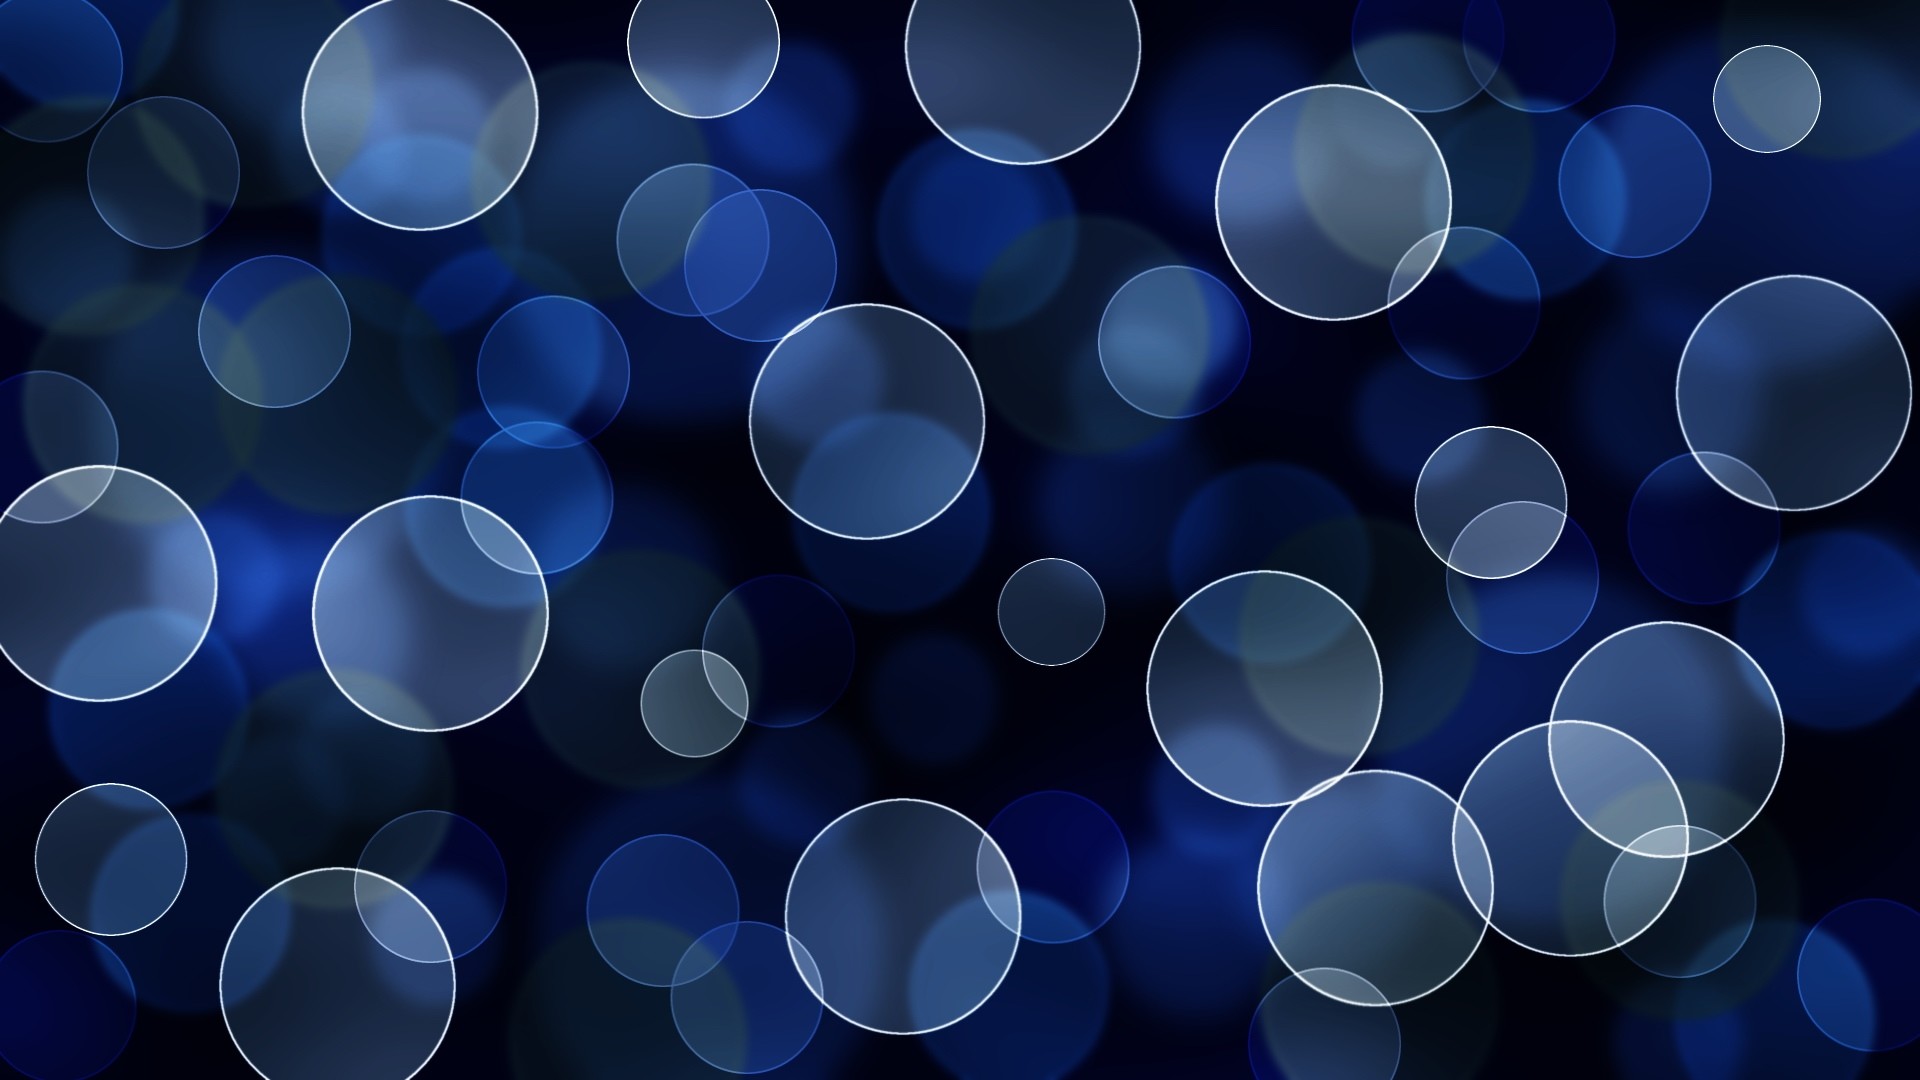 1920x1080  Blue Bubbles. How to set wallpaper on your desktop? Click the  download link from above and set the wallpaper on the desktop from your OS.